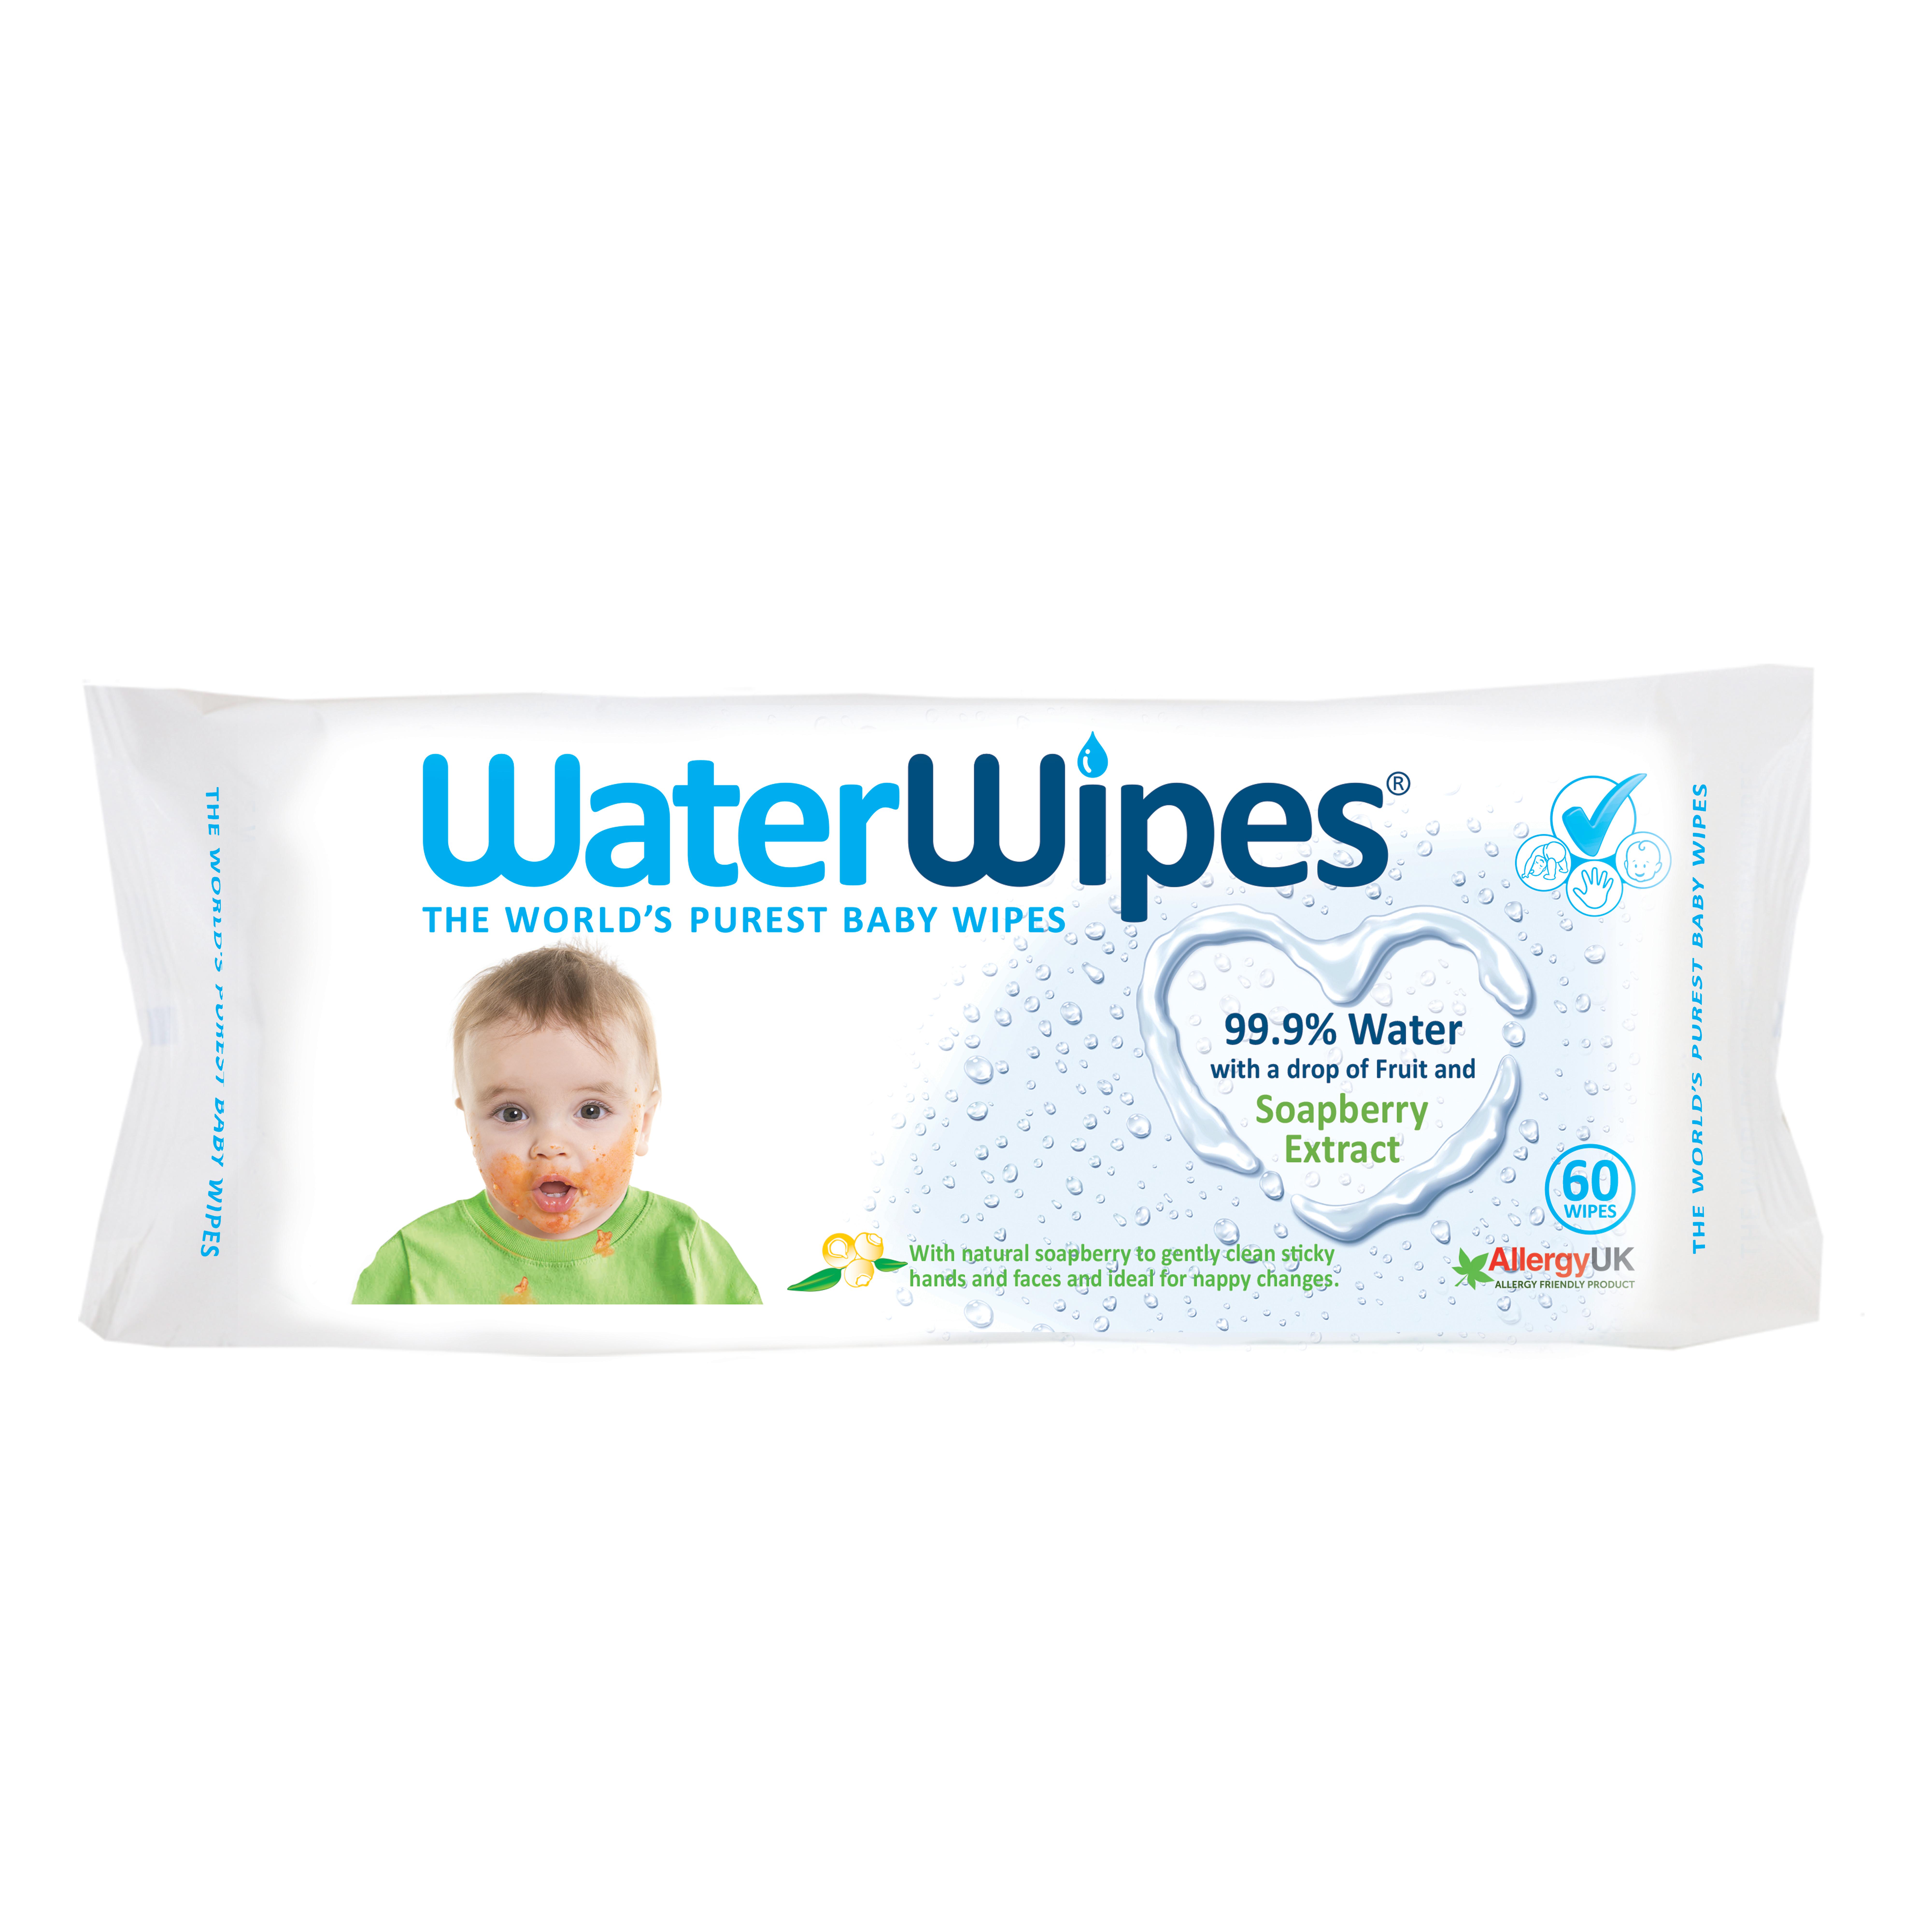 WaterWipes with Soapberry launched in 2018, intended for growing babies who are starting to explore the world around them